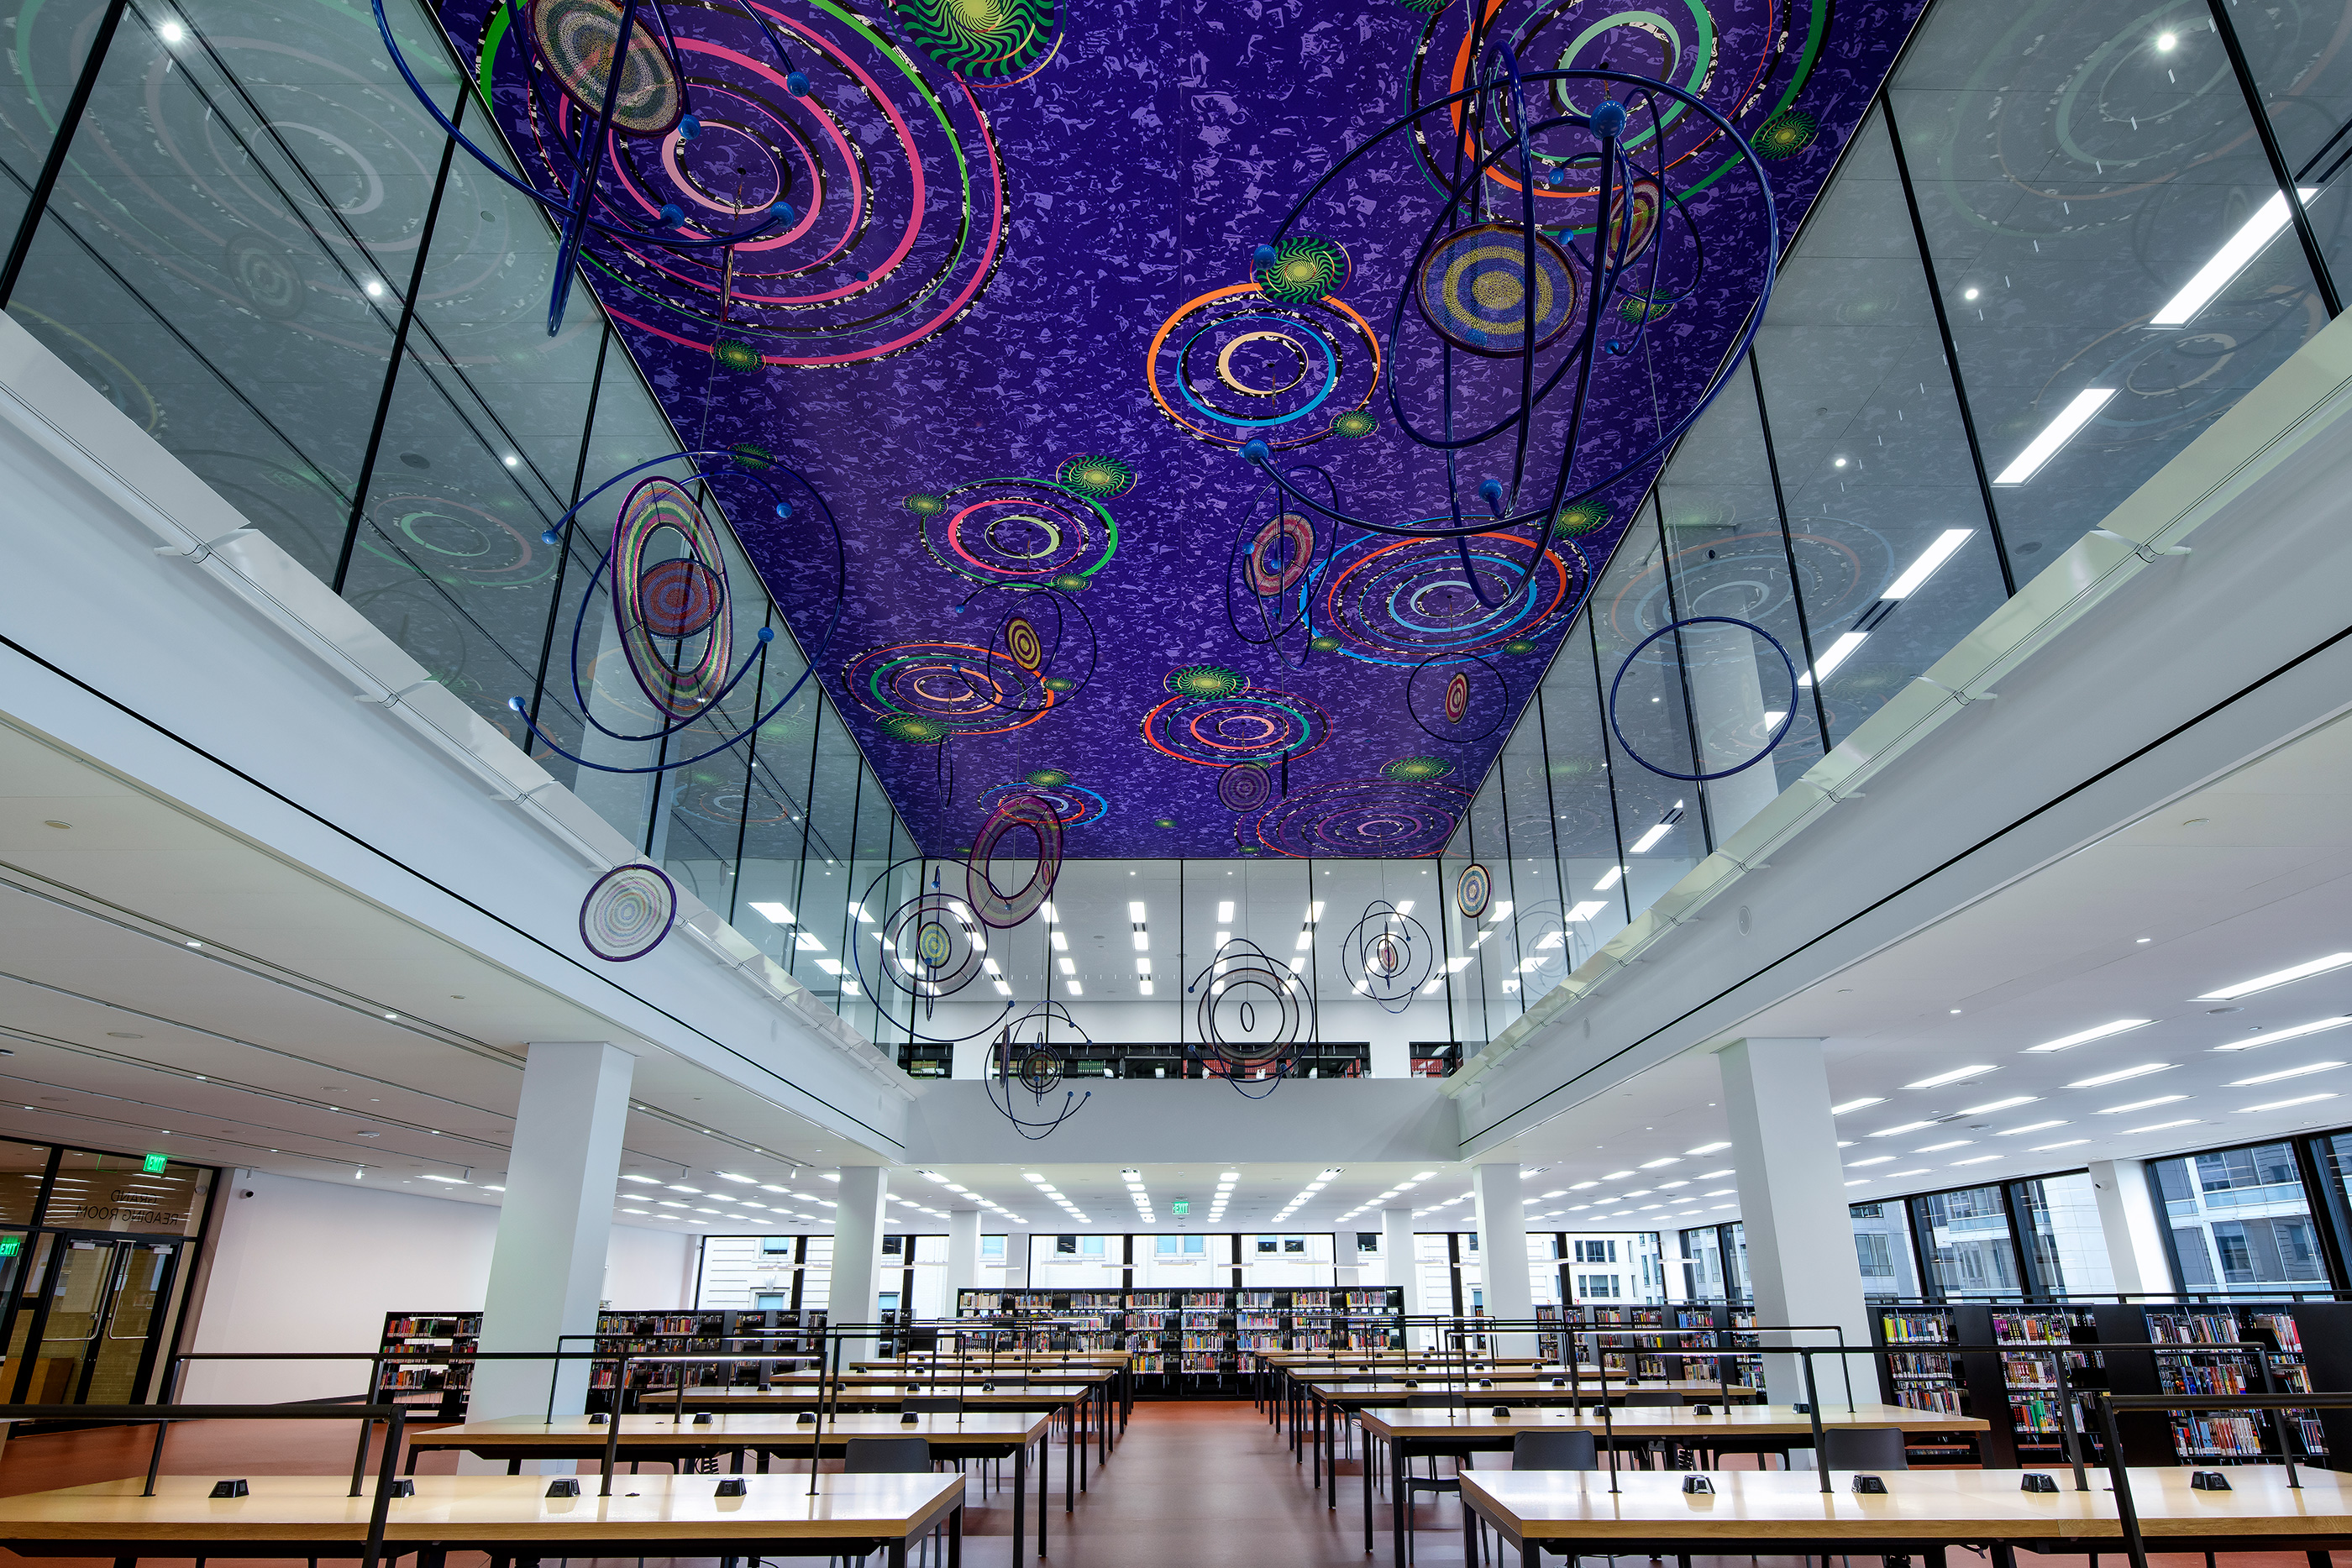 A gallery with purple ceiling and dangling lights